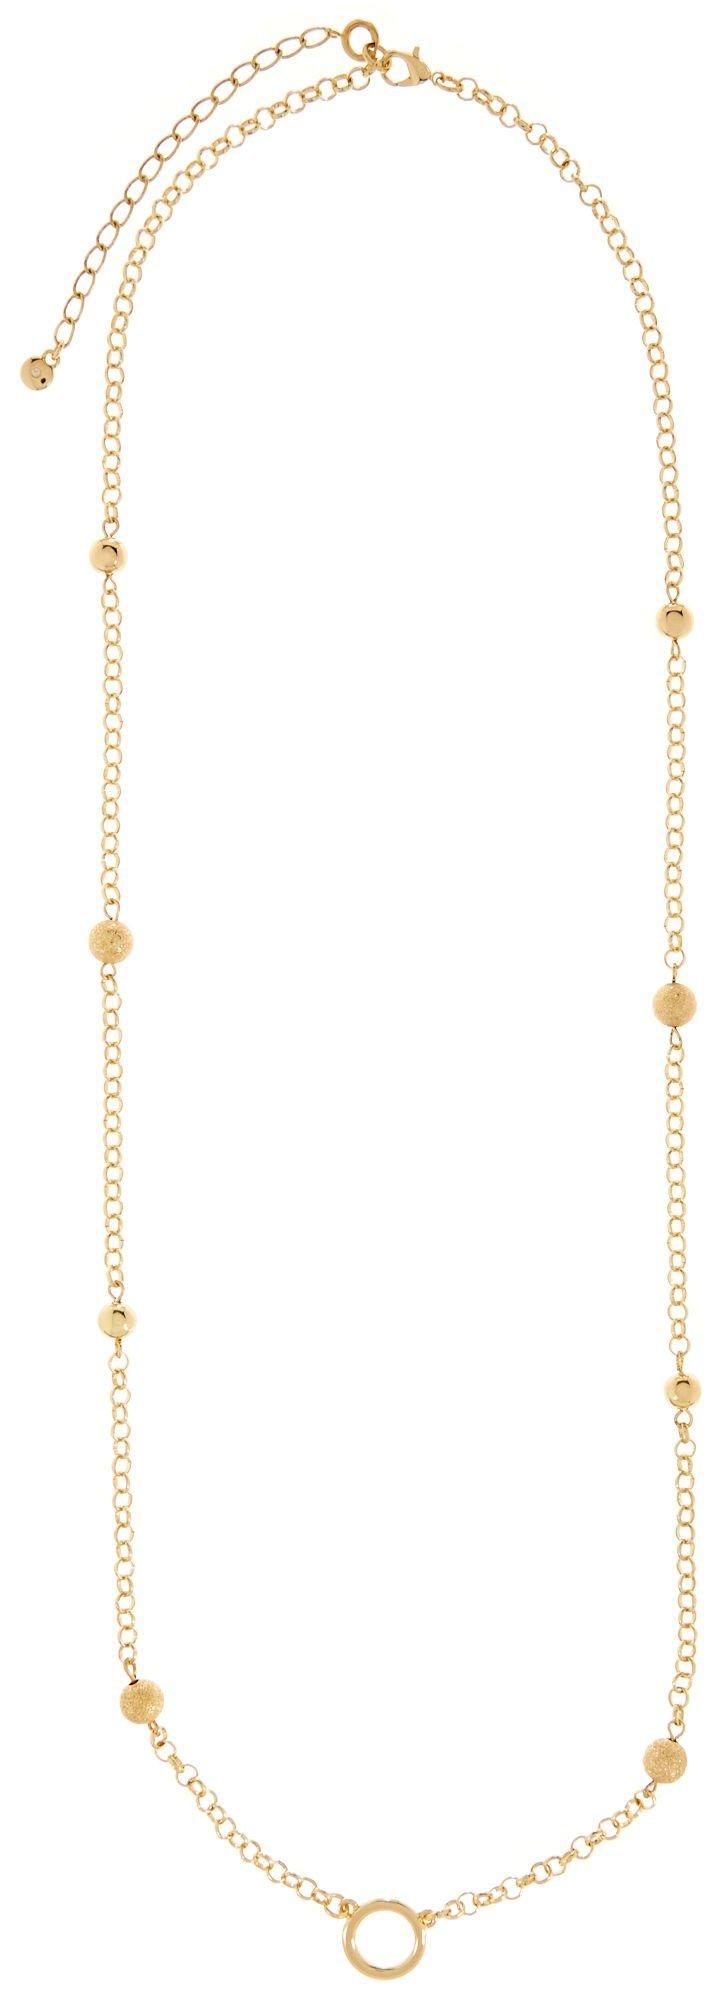 By Roman Gold Tone Ball Necklace